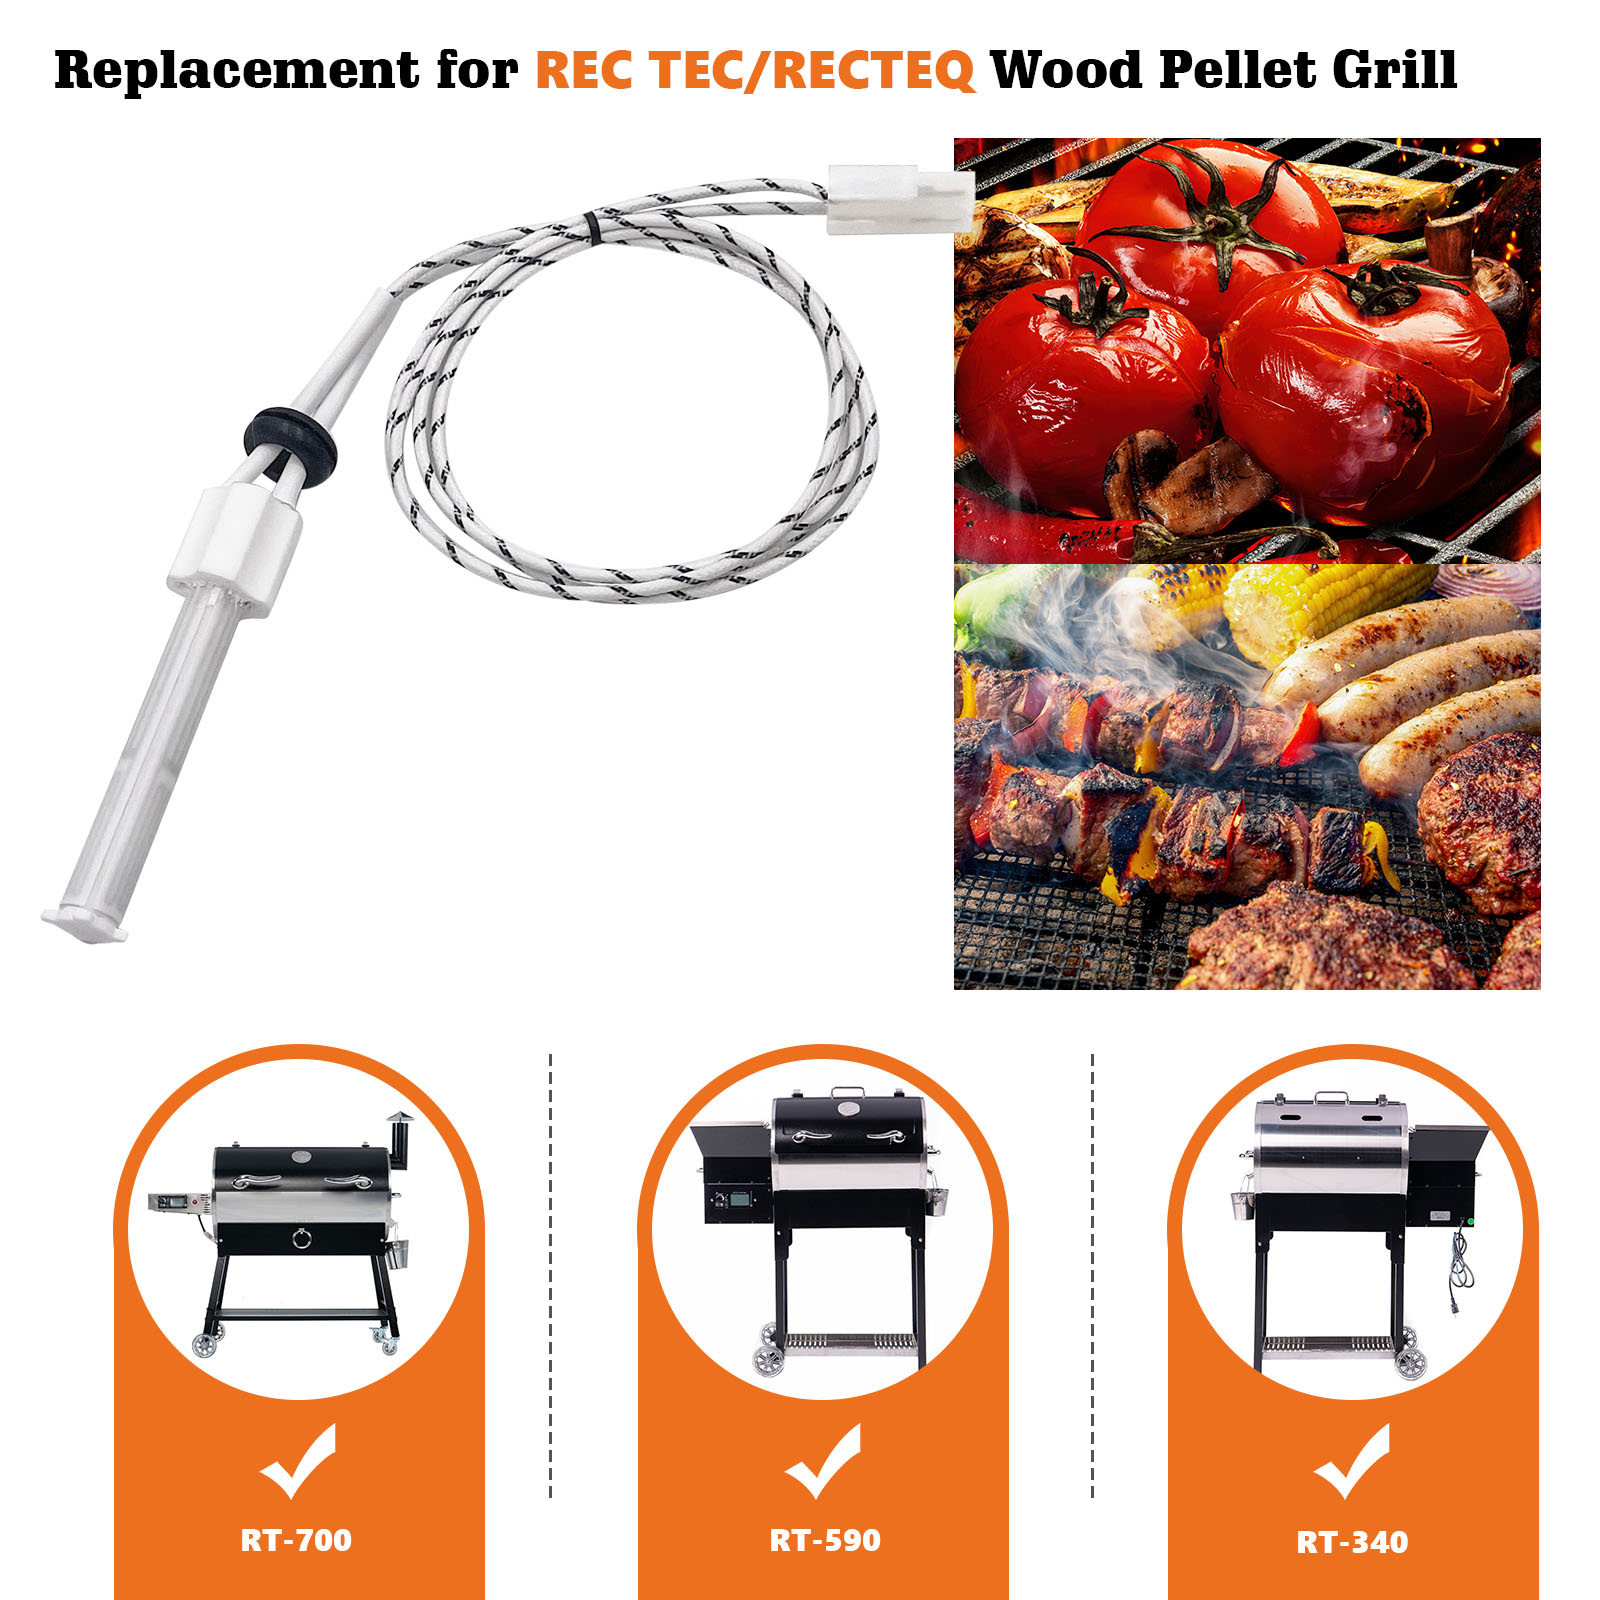 Ceramic Igniter Element Replacement for Rec Tec, recteq Wood Pellet Grill and Smokers, 120V 80W Grill Replacement Parts